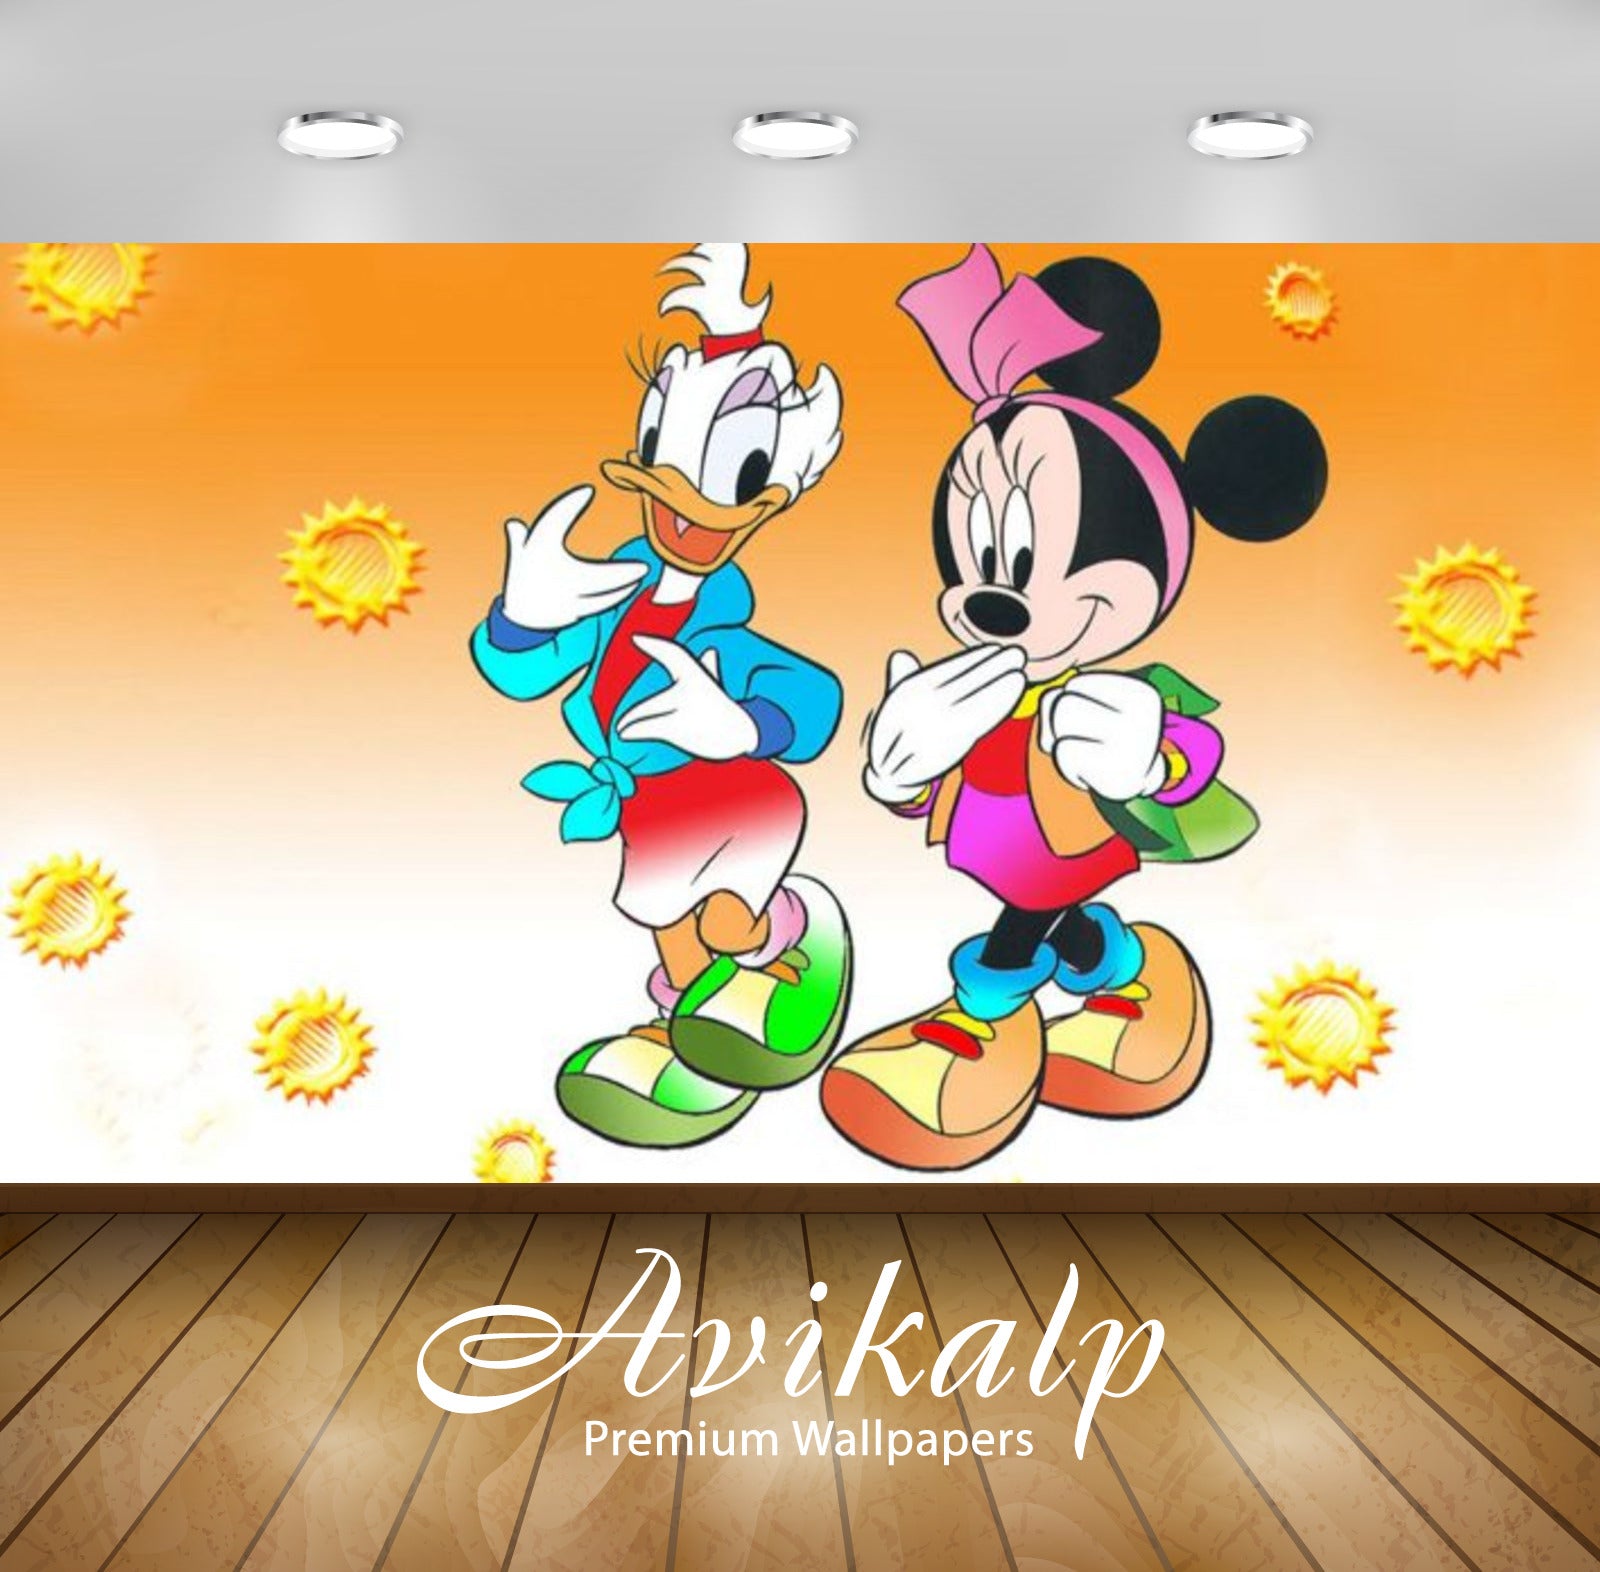 Avikalp Exclusive Awi2055 Daisy Duck And Minnie Mouse  Full HD Wallpapers for Living room, Hall, Kid